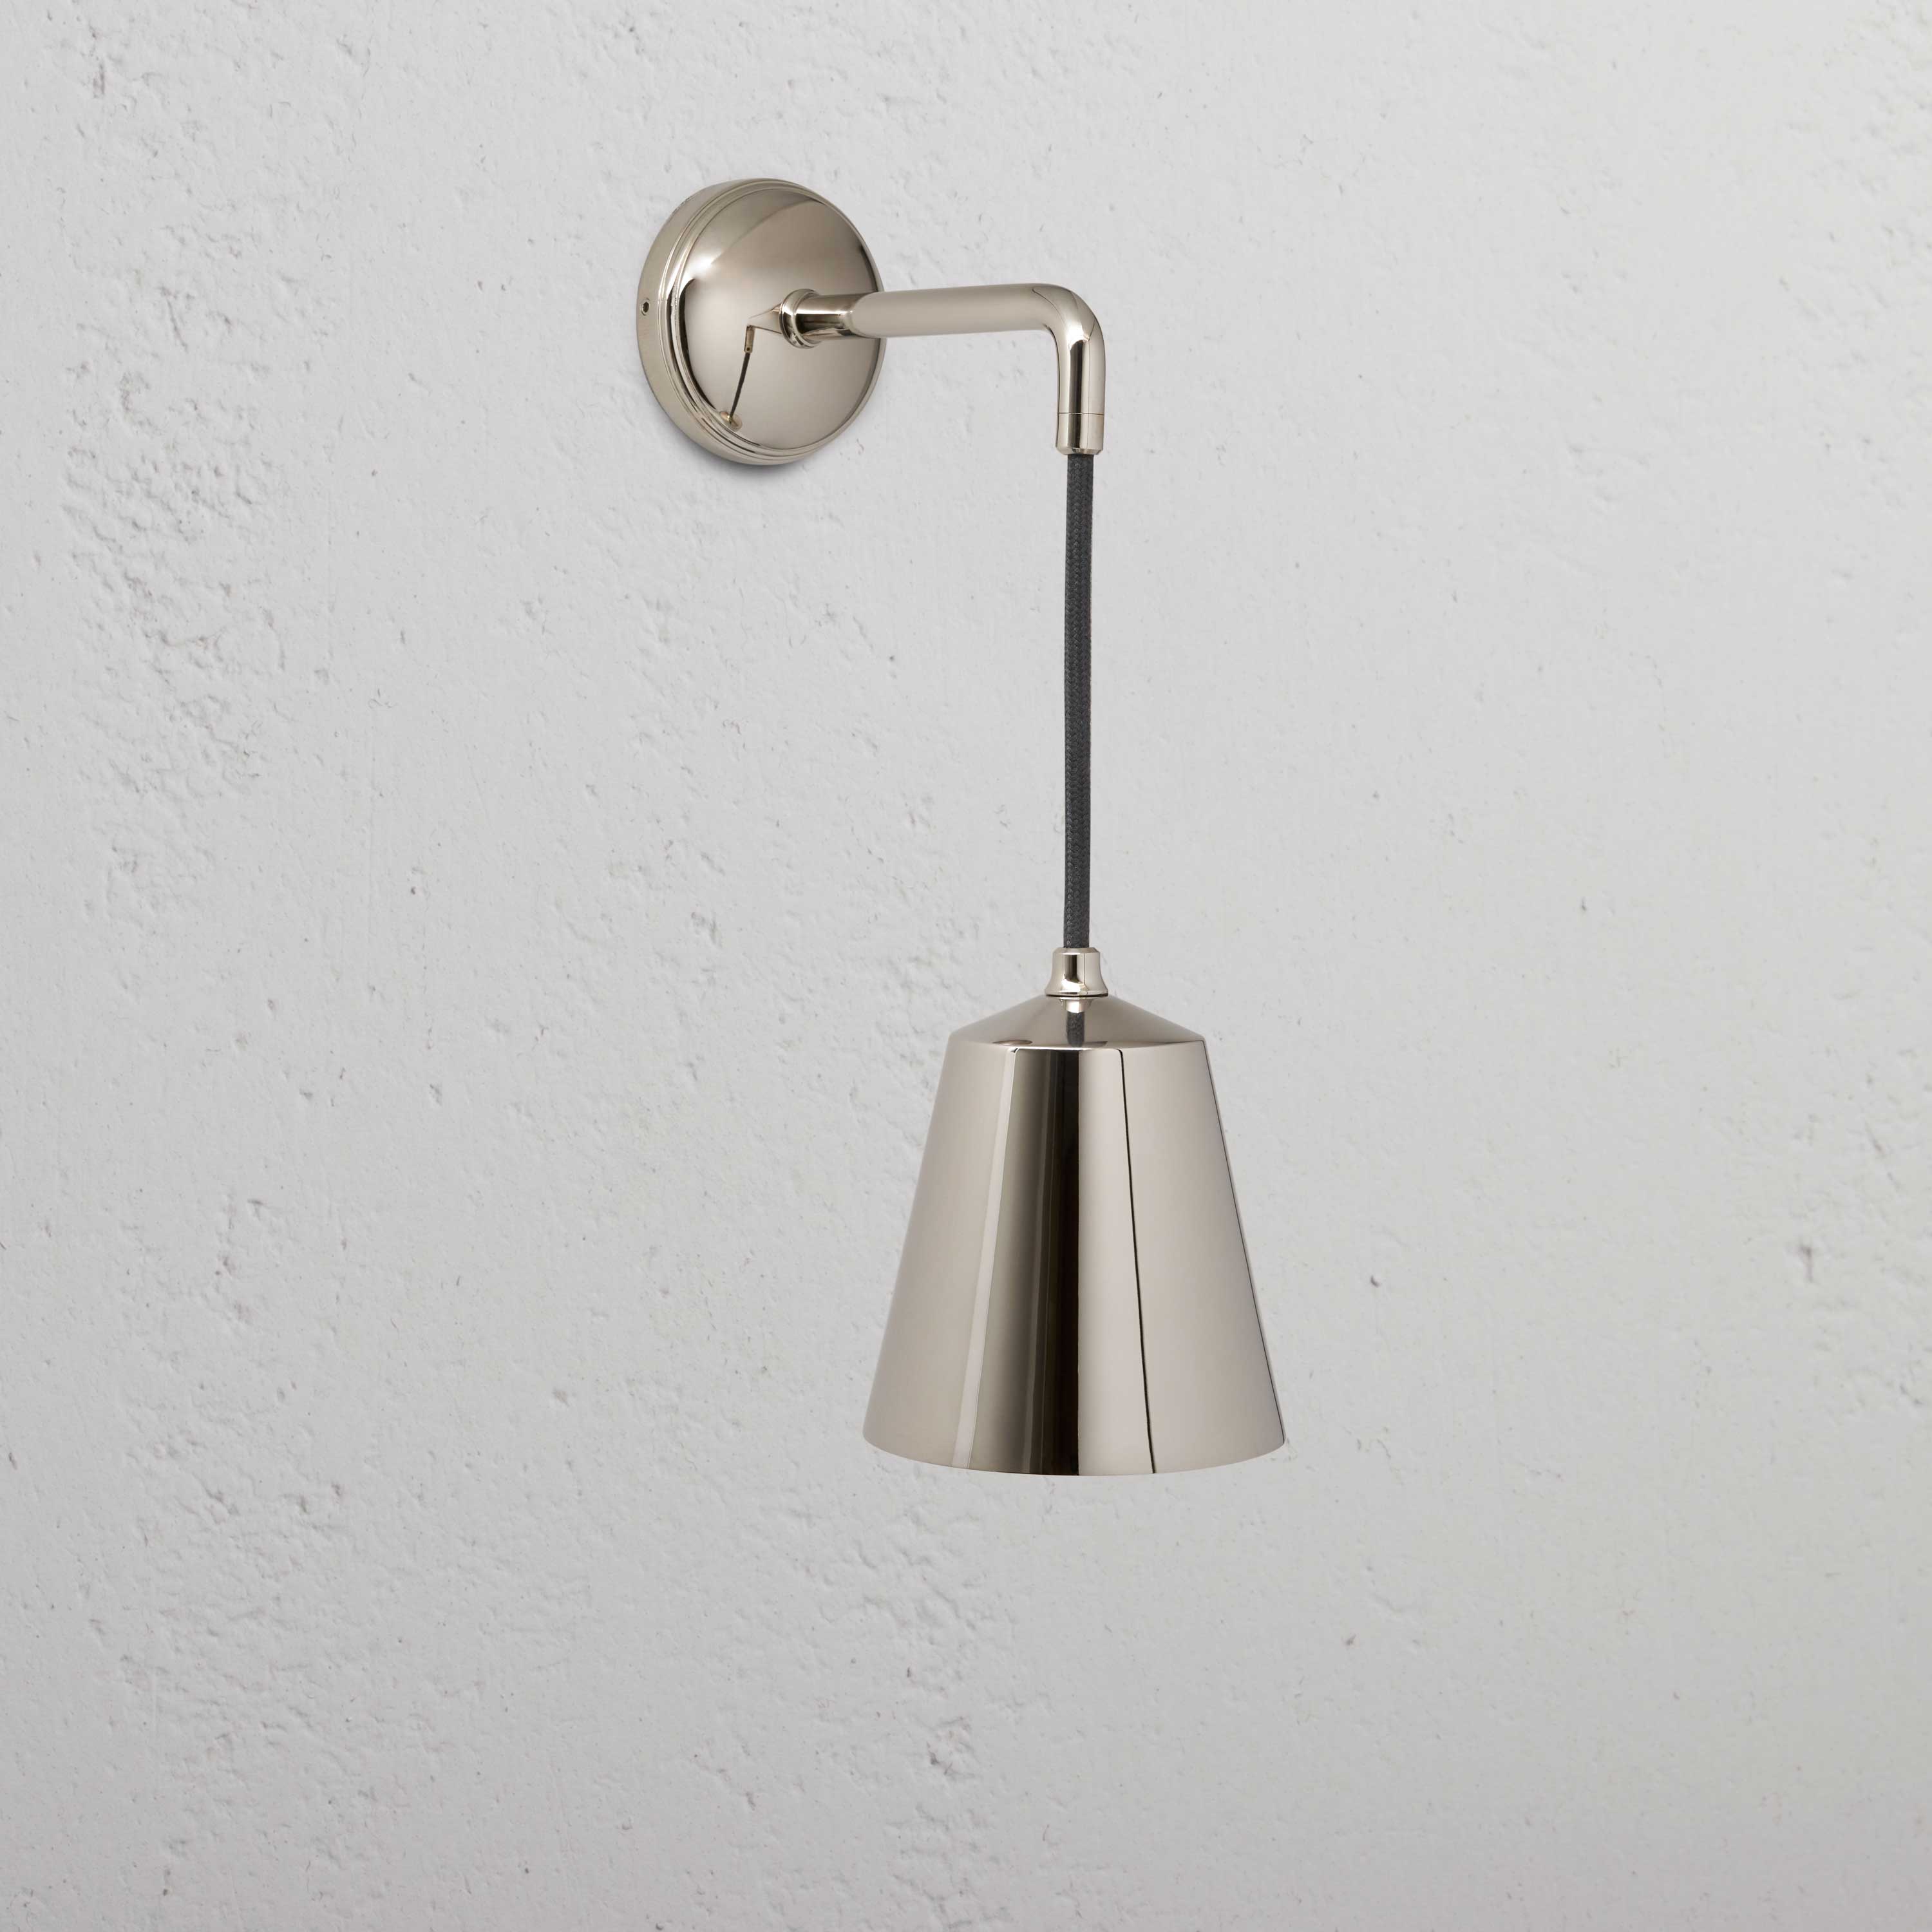 Polished Nickel Hanging Wall Light with Polished Nickel Solid Brass Shade